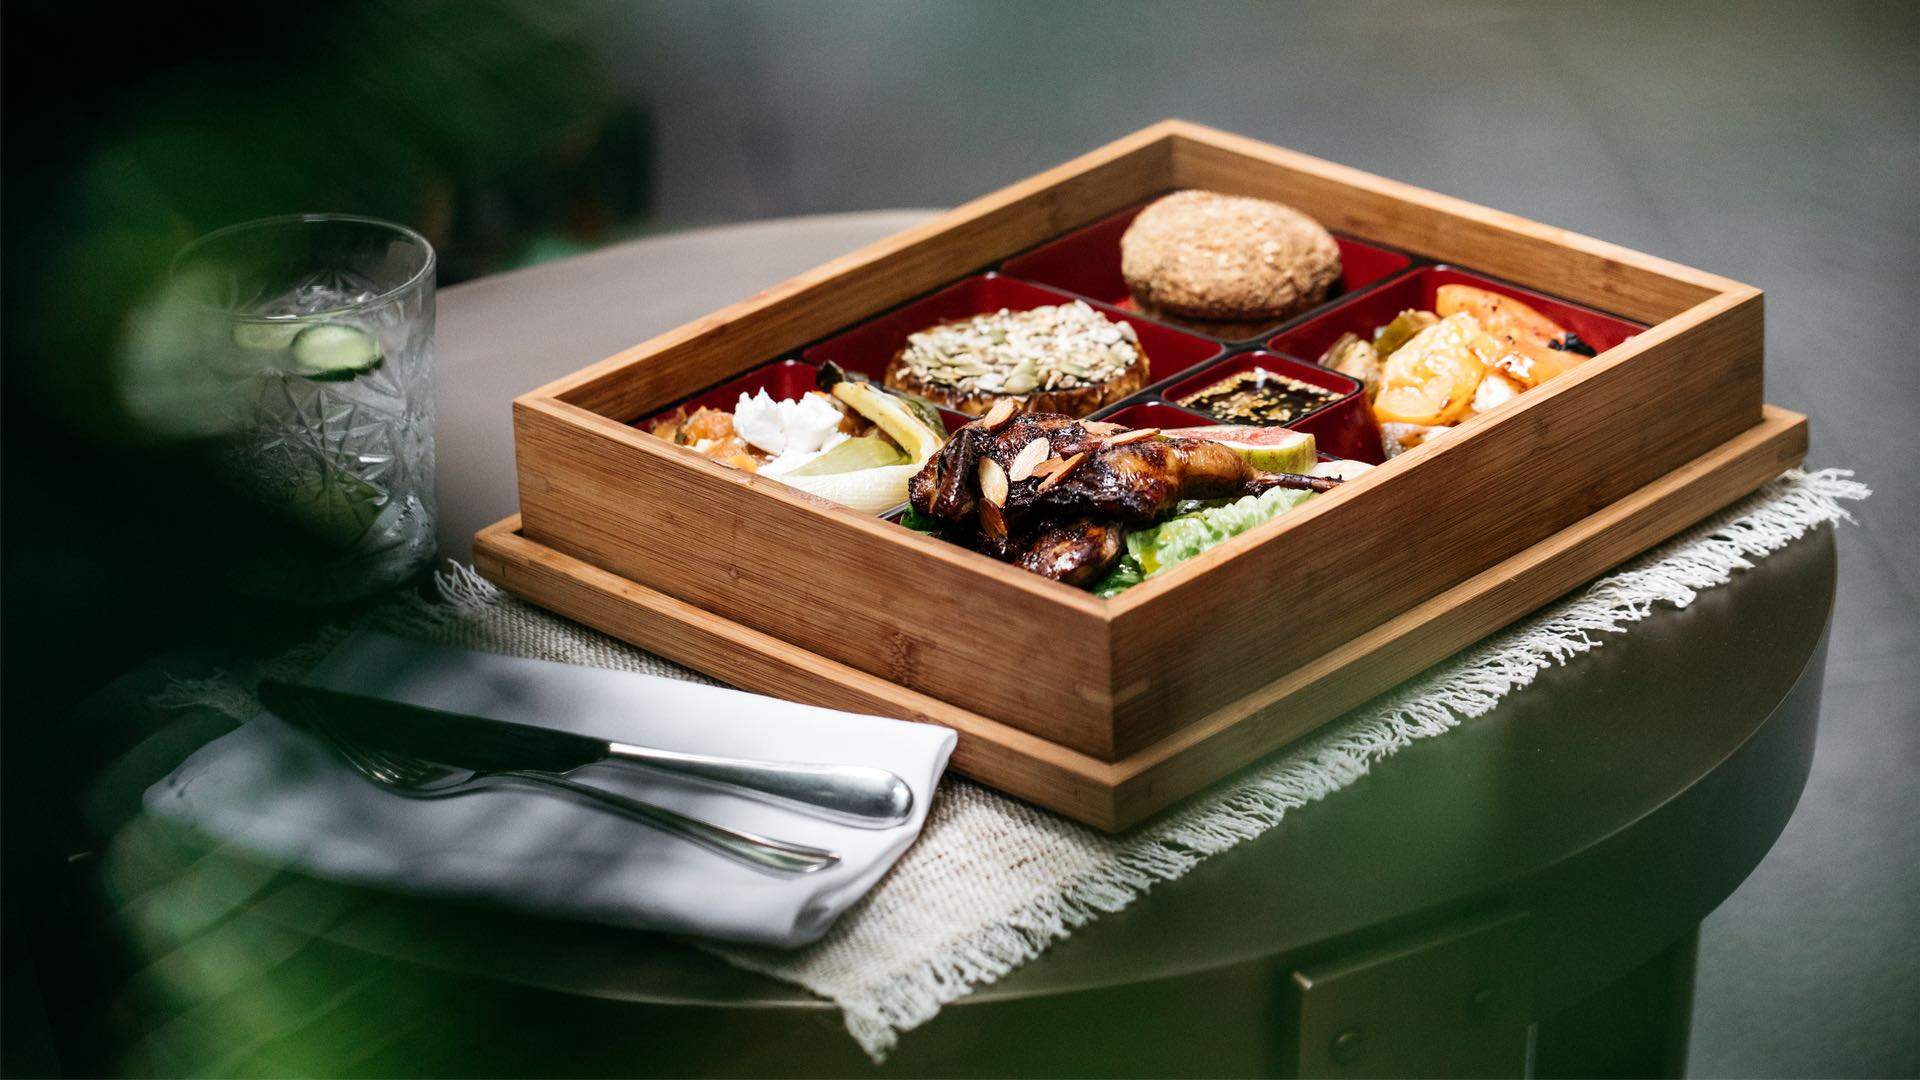 Sol Spa Is Sydney's Leafy Oasis of Ultra-Luxurious Treatments and Healthy Bento Boxes